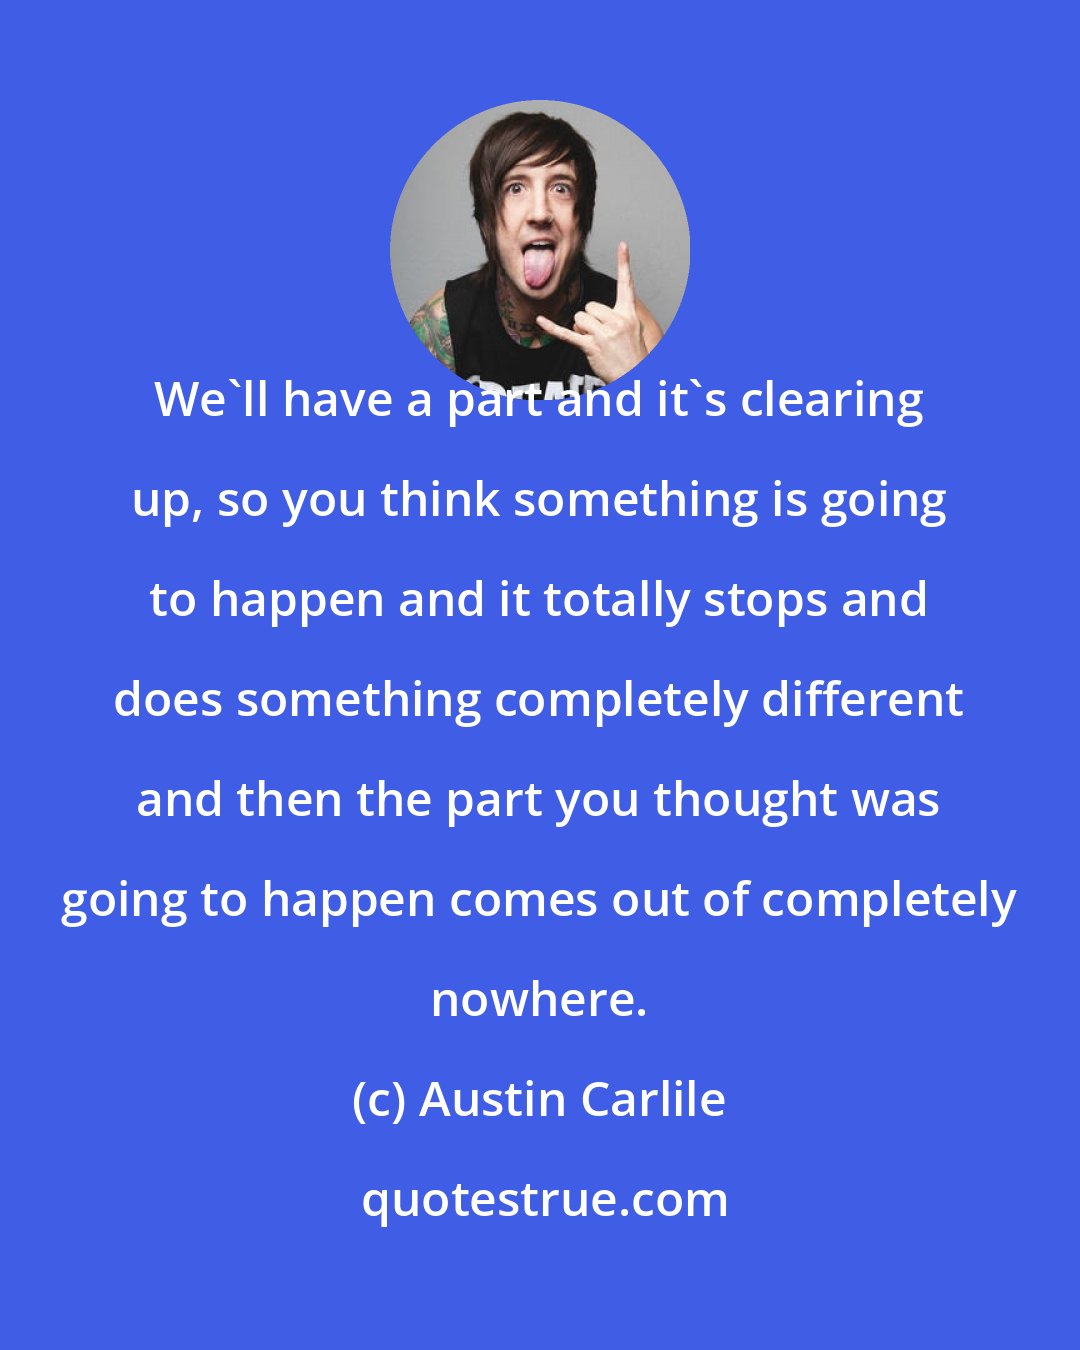 Austin Carlile: We'll have a part and it's clearing up, so you think something is going to happen and it totally stops and does something completely different and then the part you thought was going to happen comes out of completely nowhere.